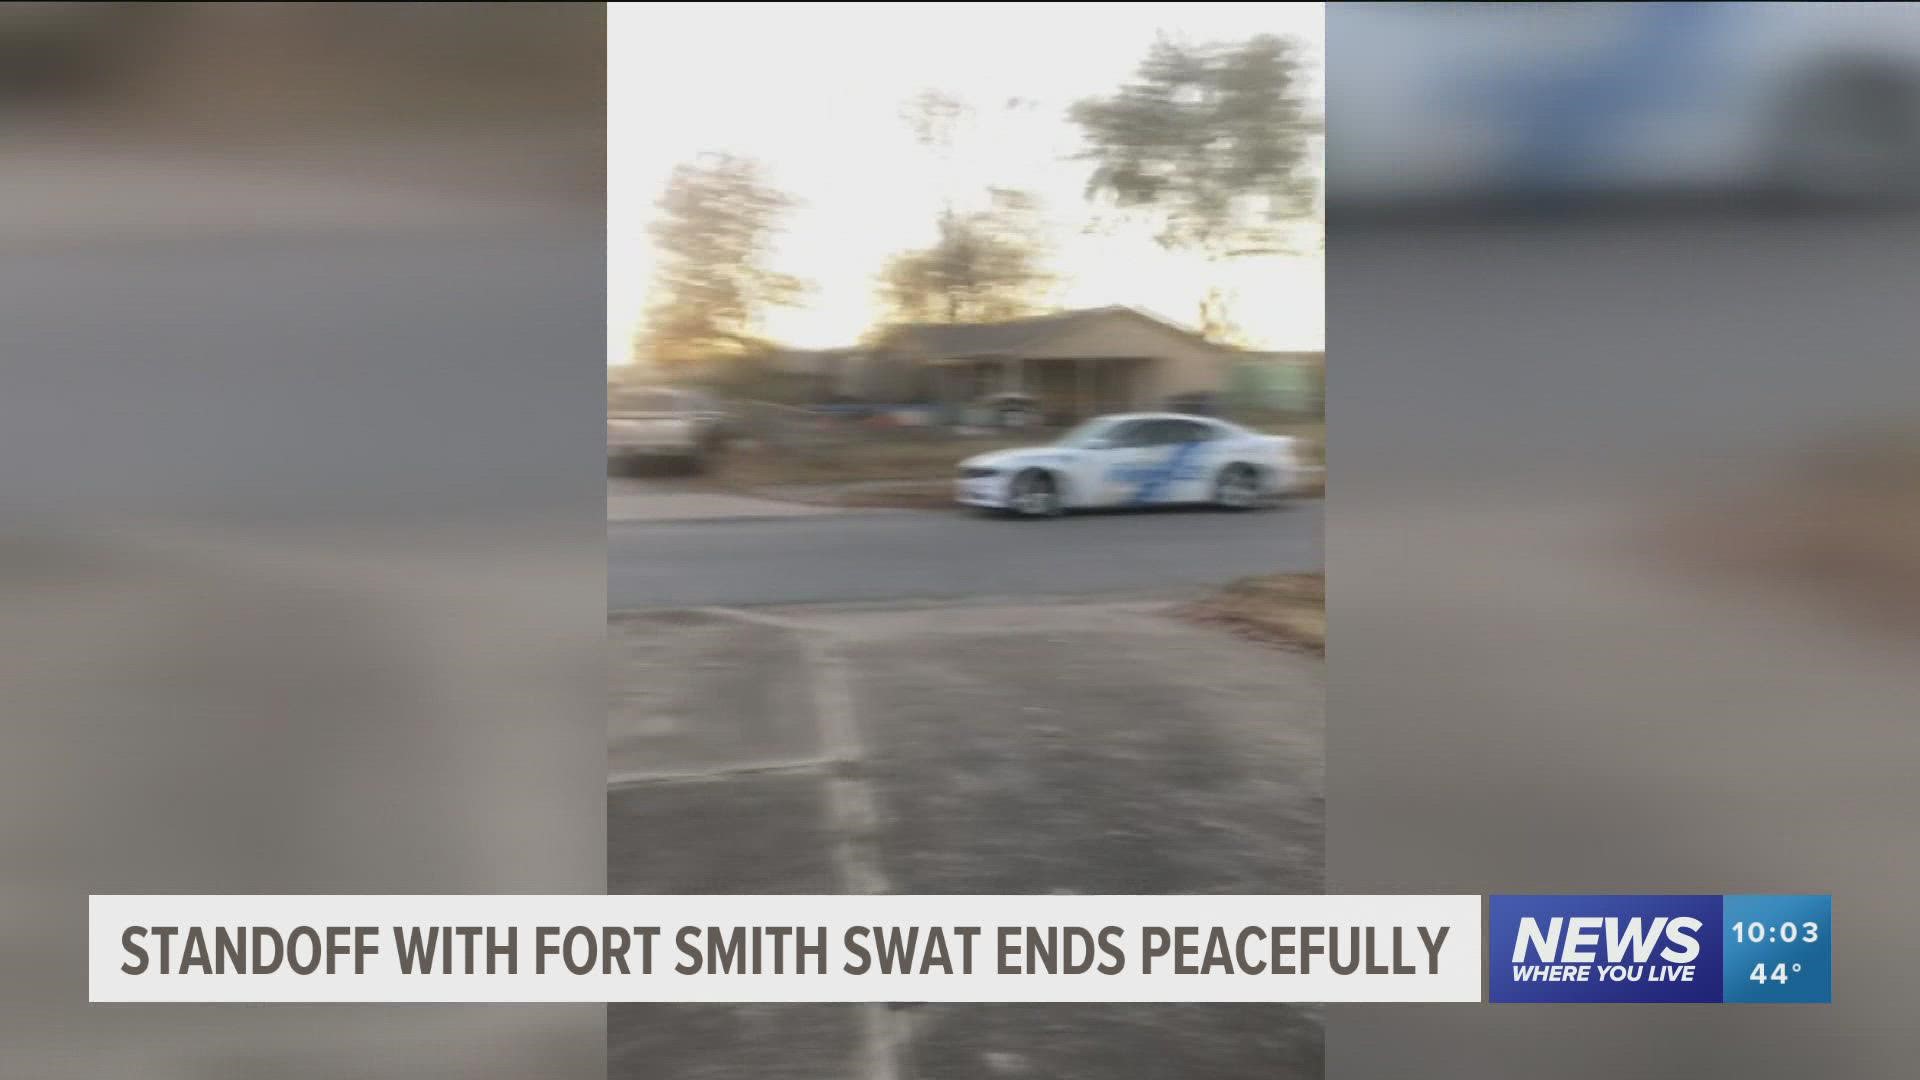 The Fort Smith SWAT team surrounded a home with a reported armed man inside.